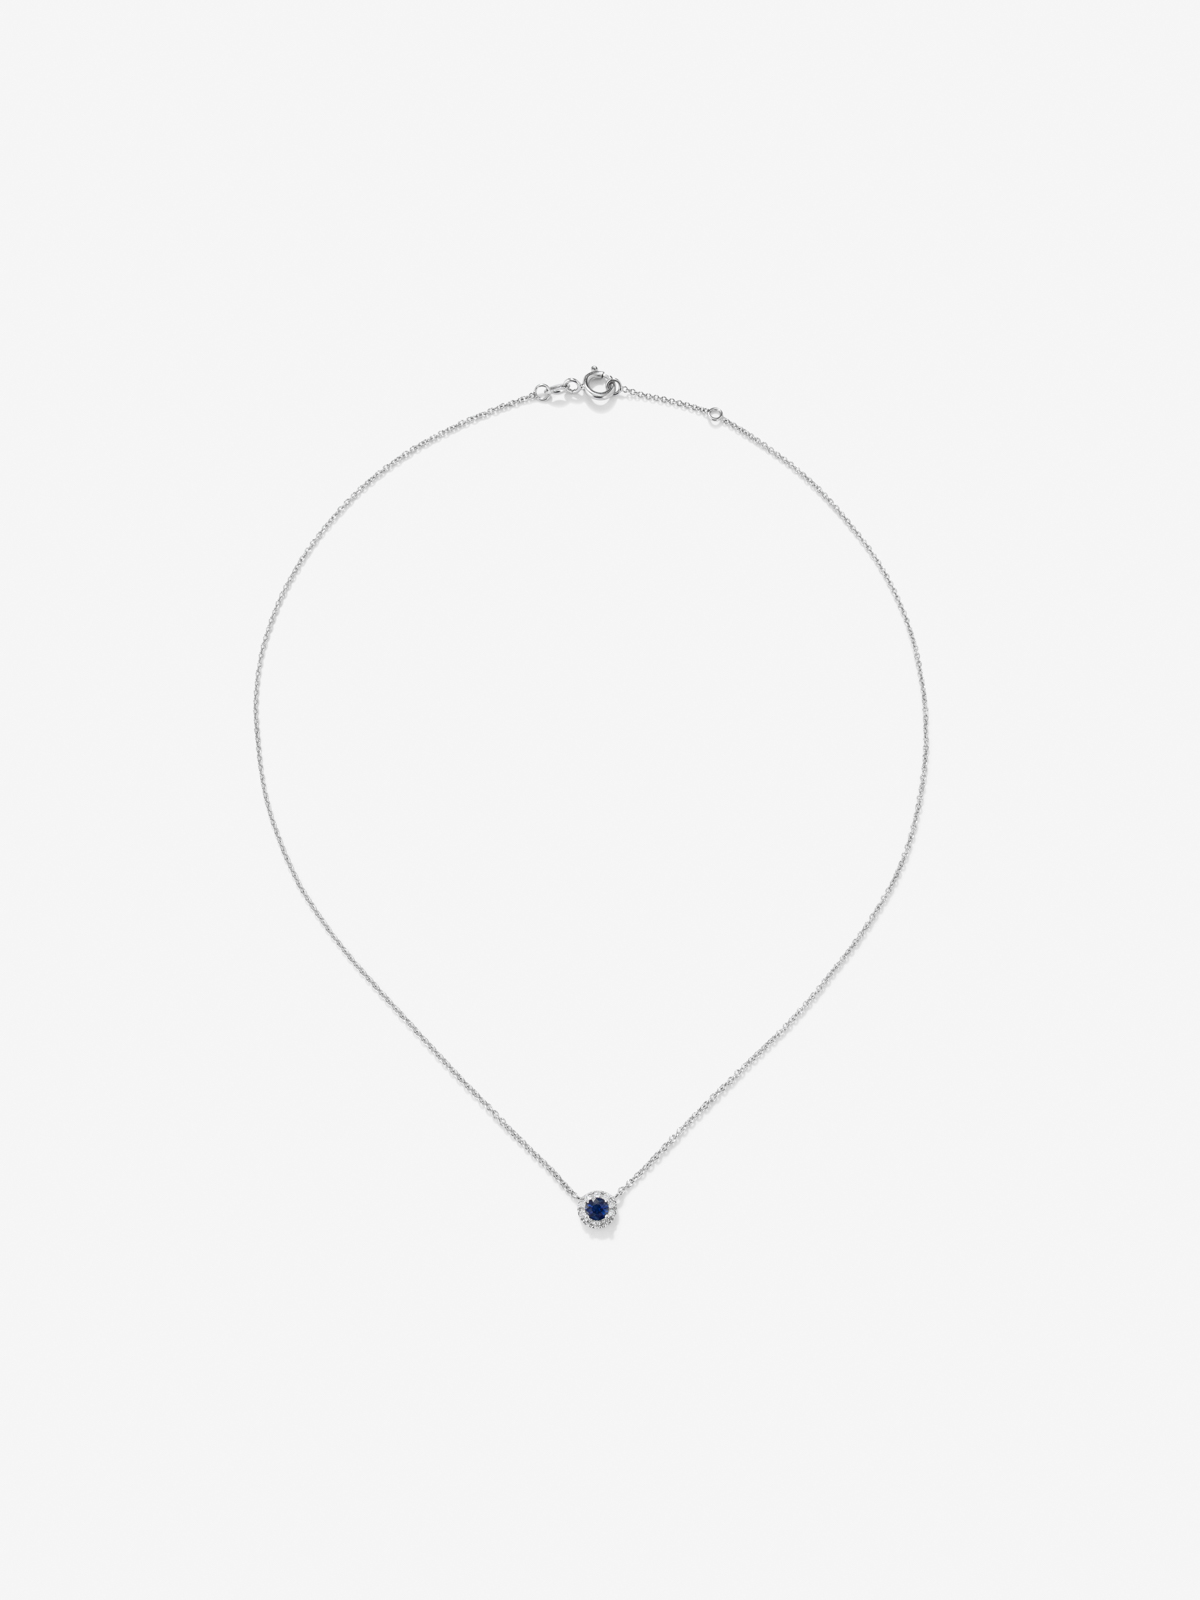 18K White Gold Orla Chain with Sapphire and Diamond